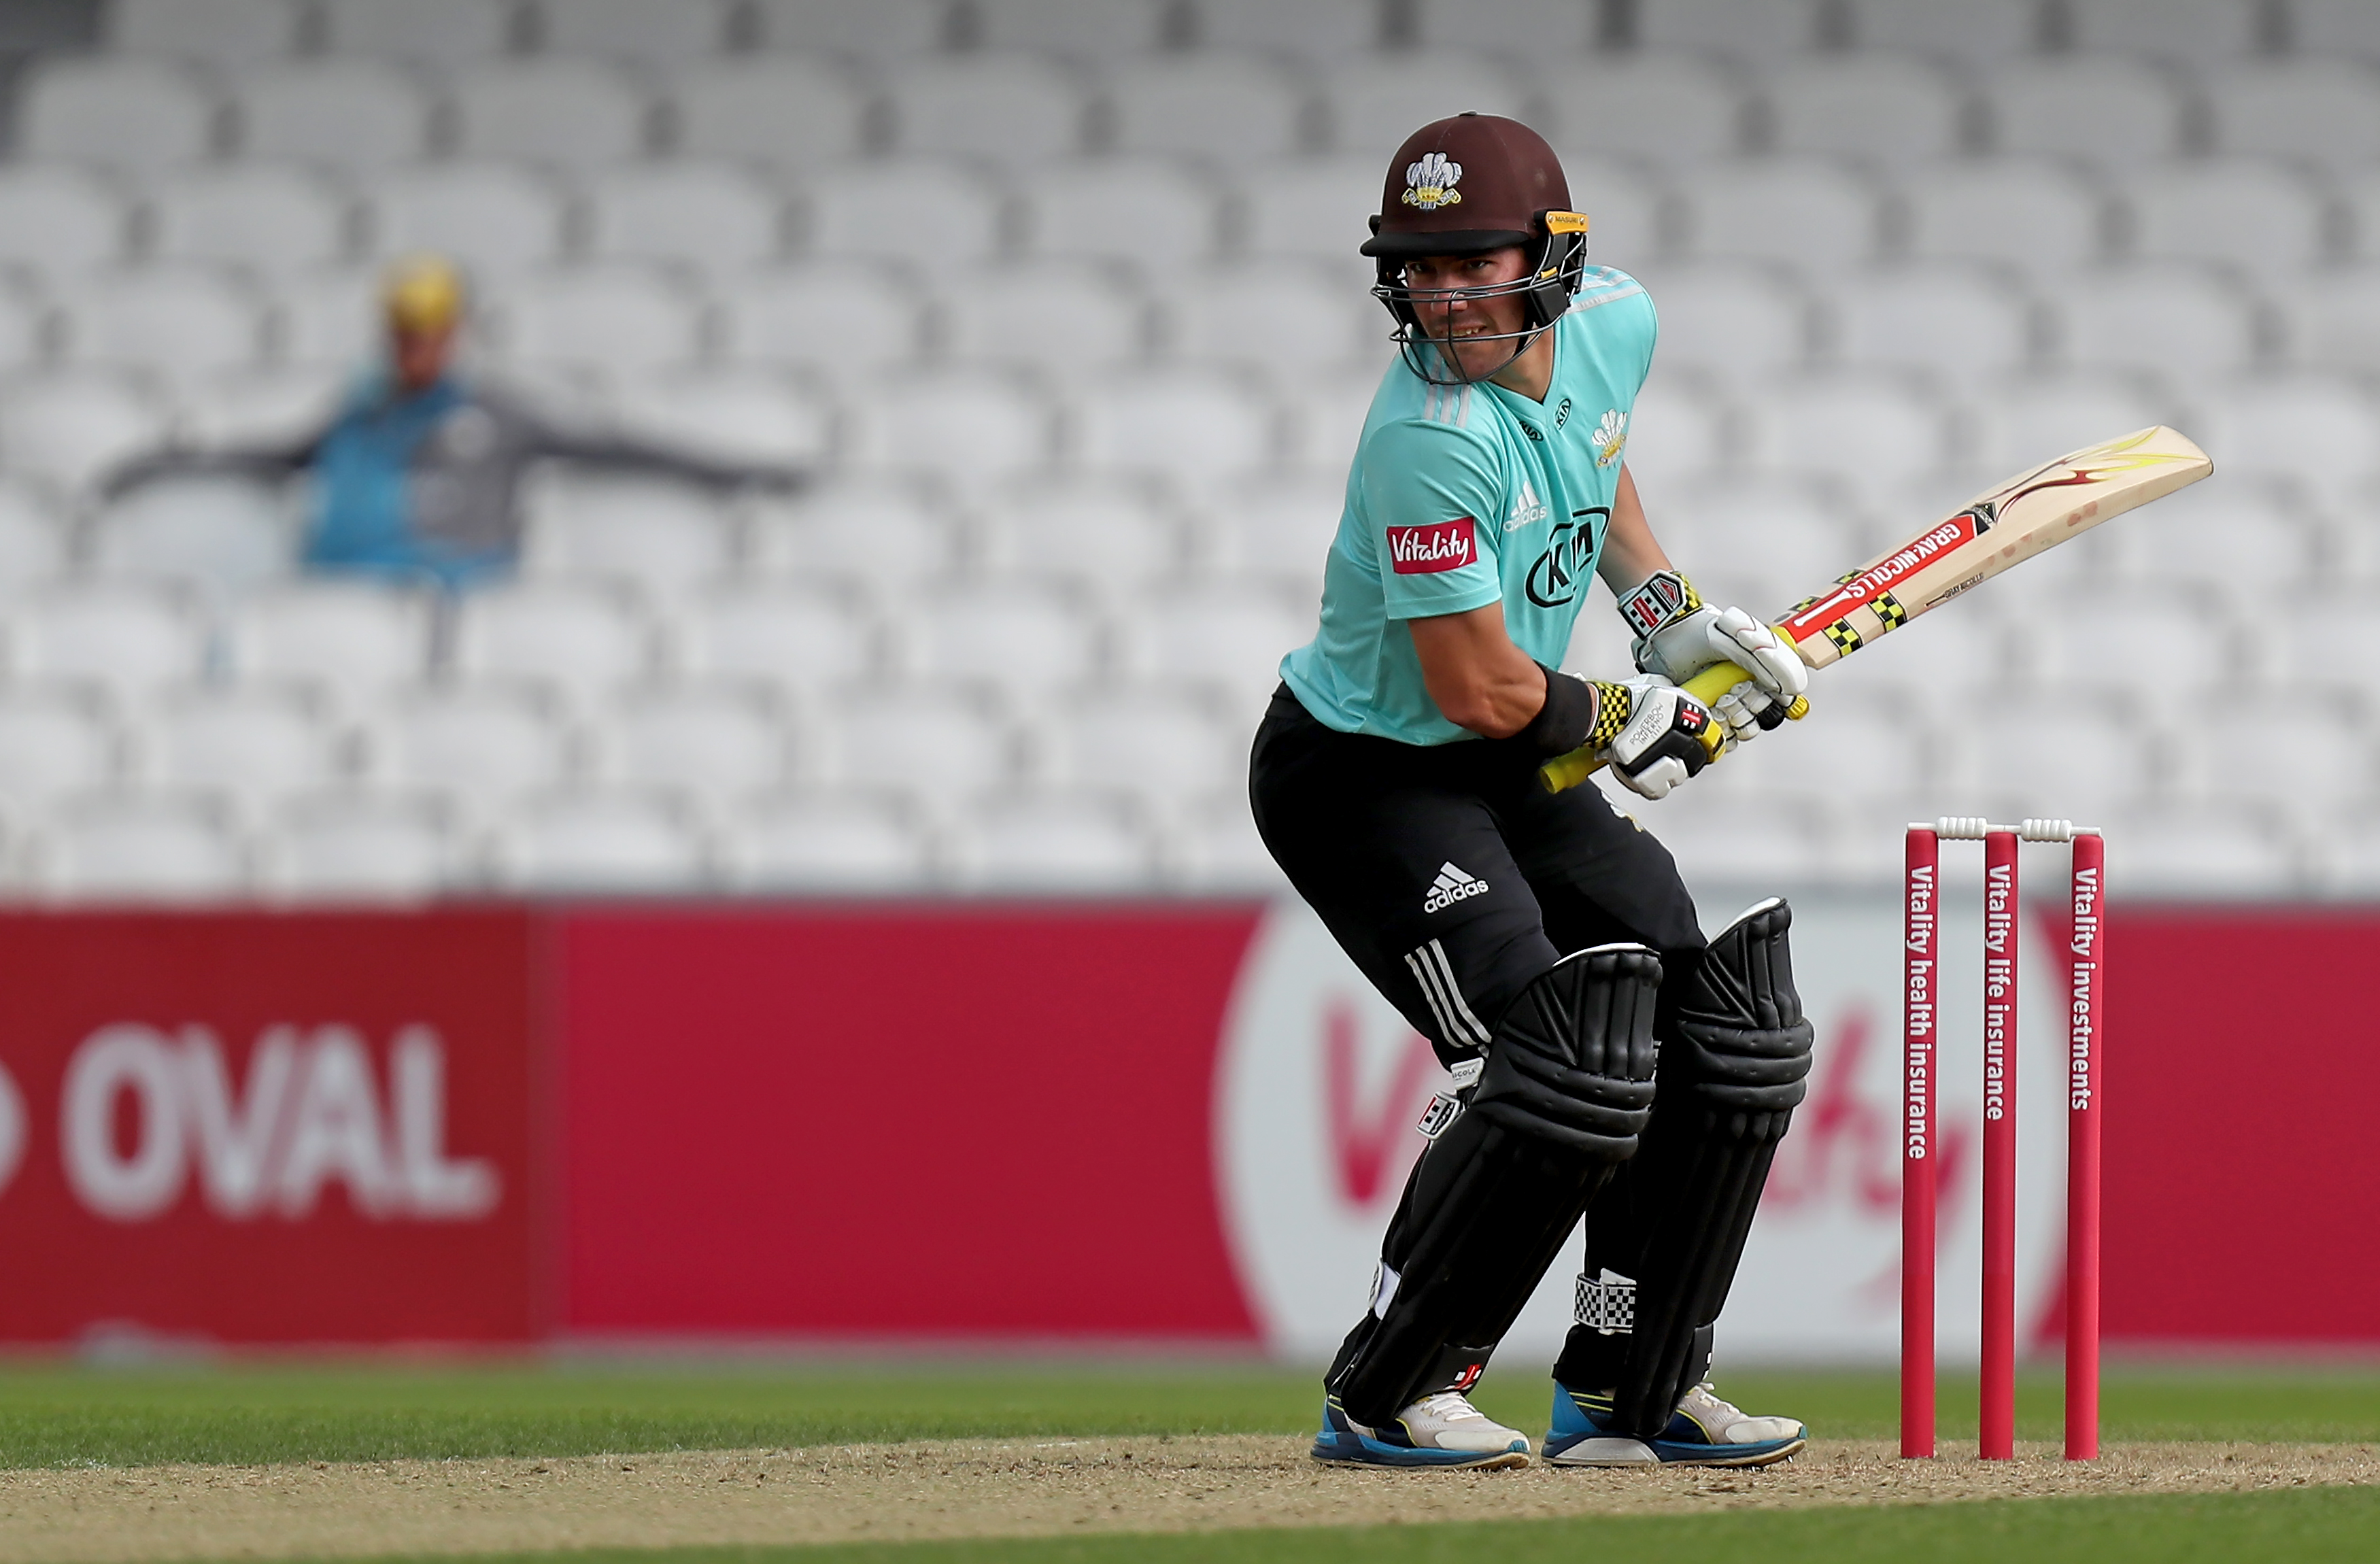 Rory Burns of Surrey prepares to face the next ball during Surrey vs Essex Eagles in the Vitality Blast at The Kia Oval on 30 August.